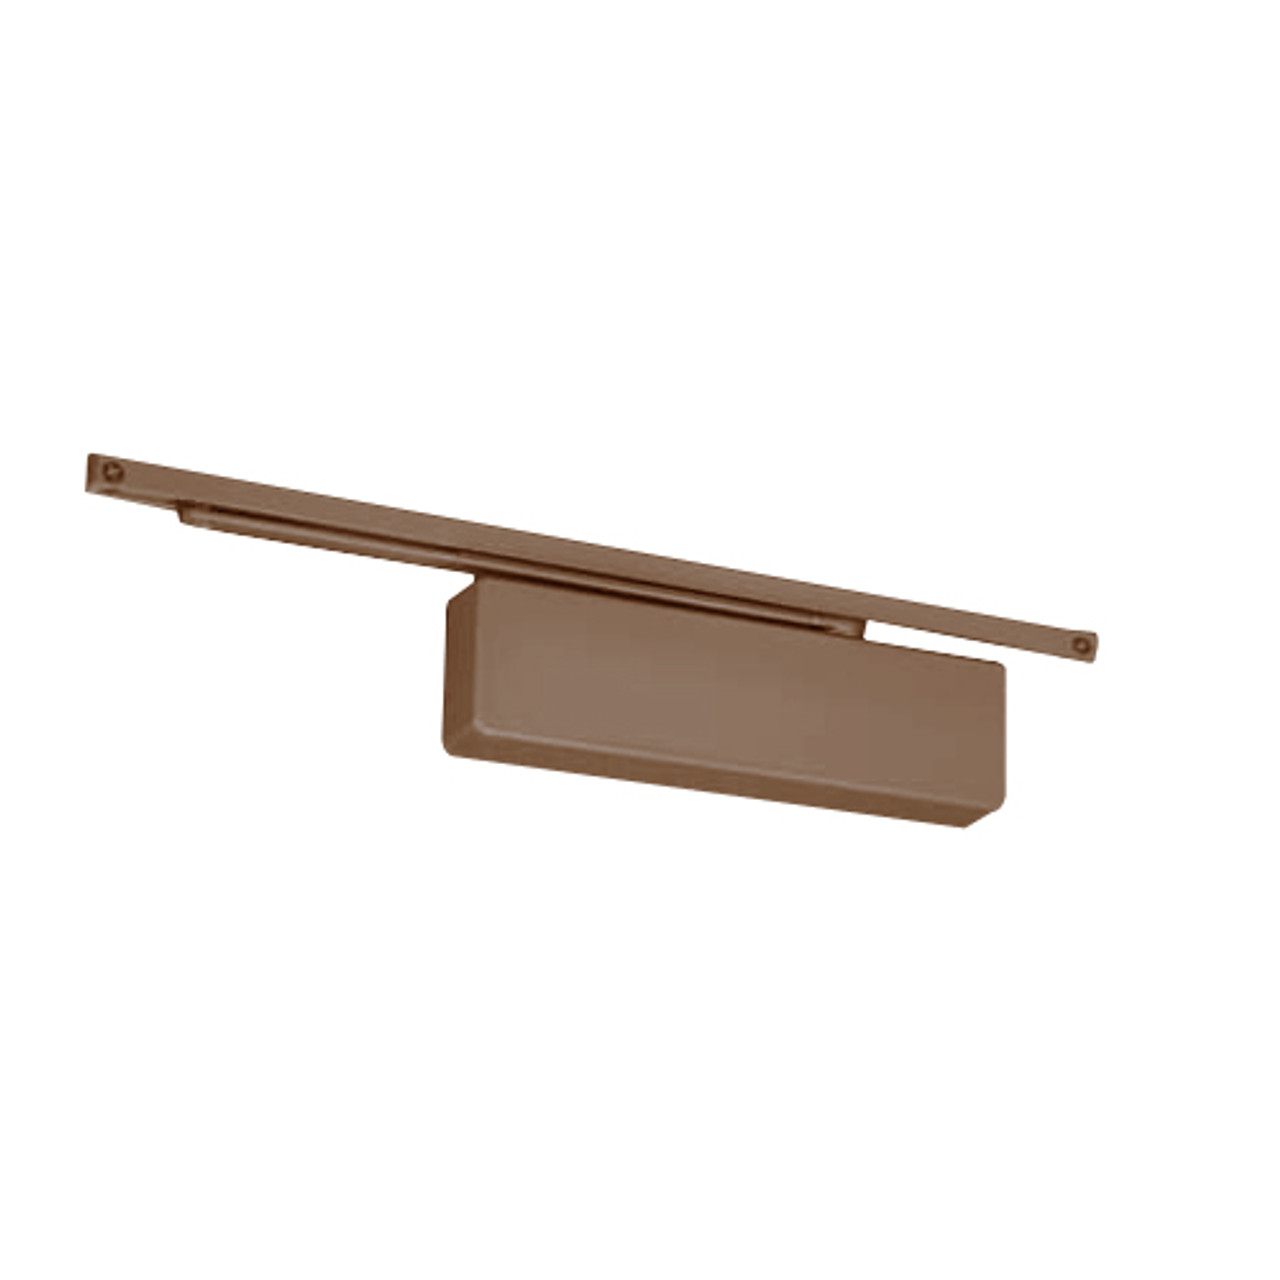 7540STH-691 Norton 7500 Series Hold Open Institutional Door Closer with Pull Side Low Profile Slide Track in Dull Bronze Finish